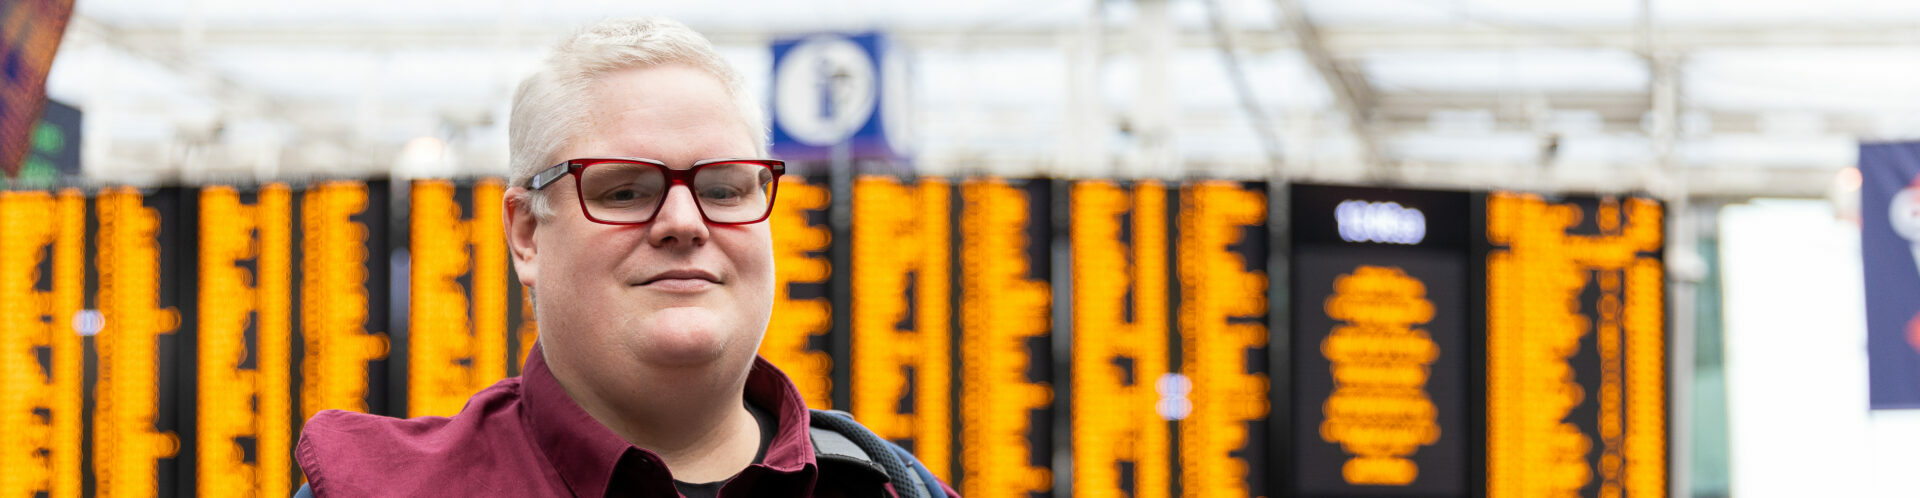 A white man with glasses, short white hair and a red shirt smiling at the camera. He is standing in a train station with information screens in the background.